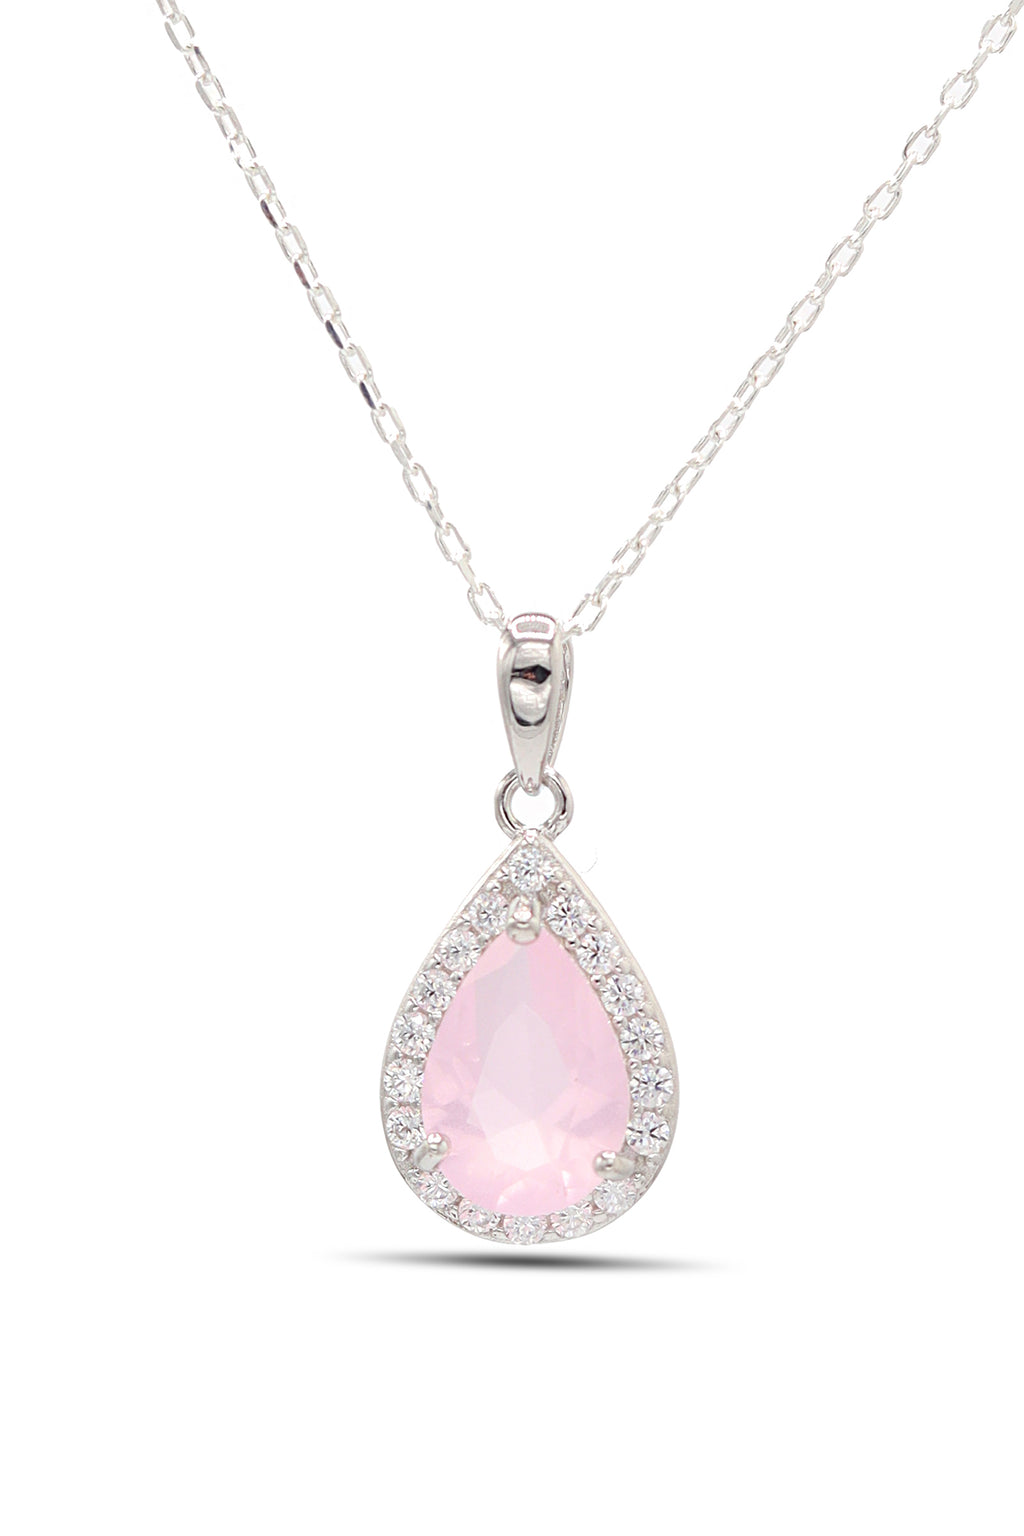 Drop Model Silver Necklace With Quartz and Zircon (NG201021894)